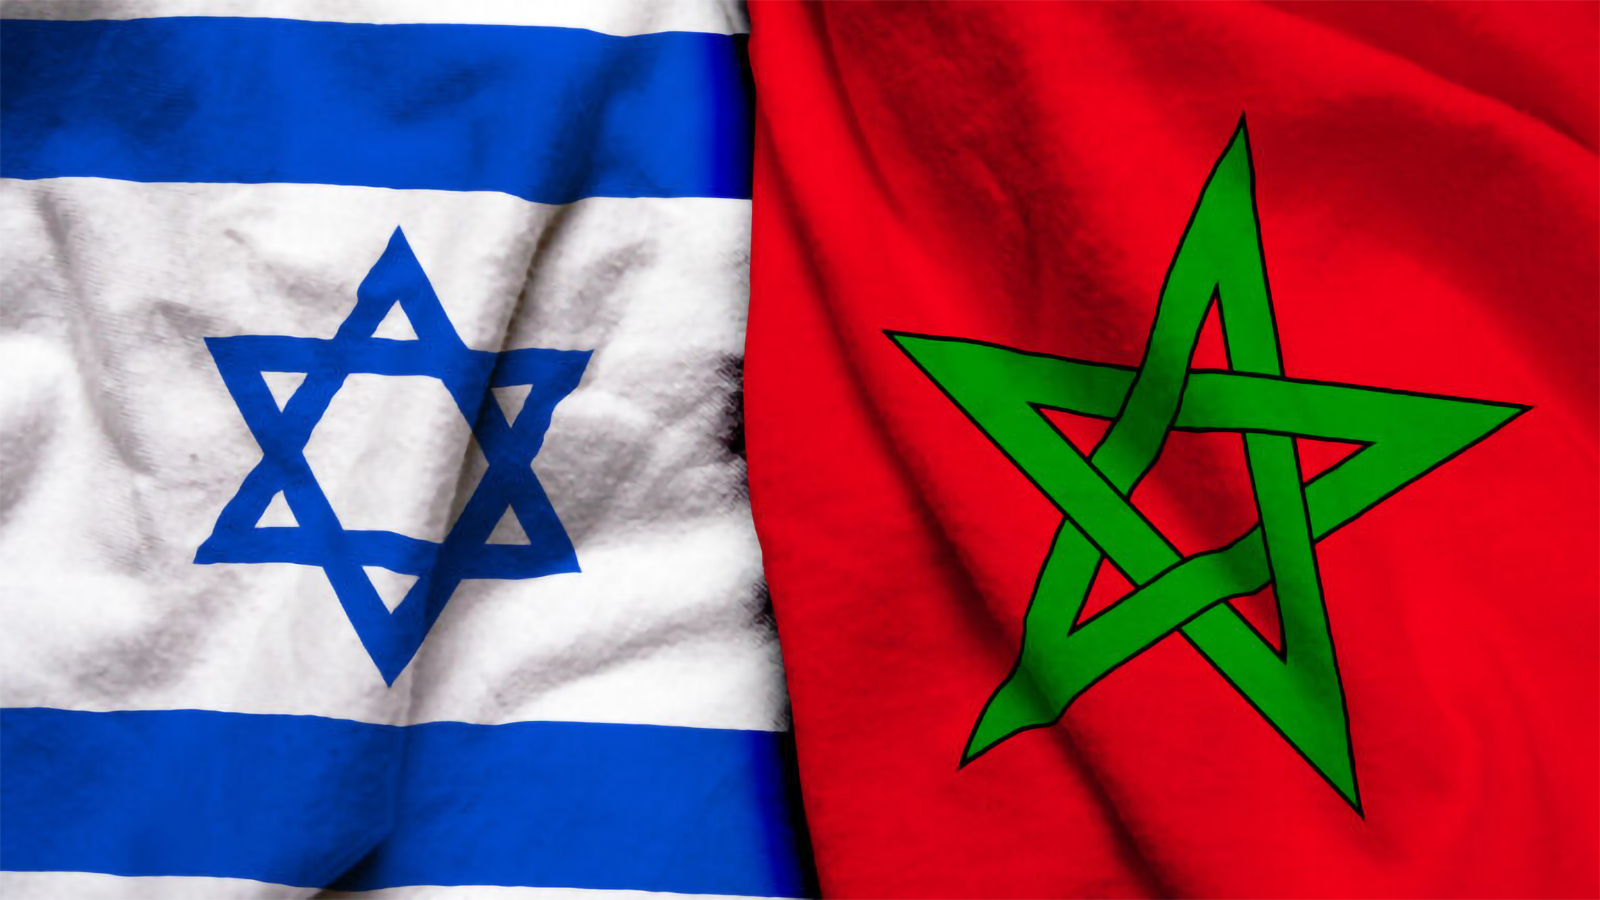 After the Resumption of Relations. The Creation of the “Forum of Israeli-Moroccan Friendship” to Stimulate Cooperation in Various Fields